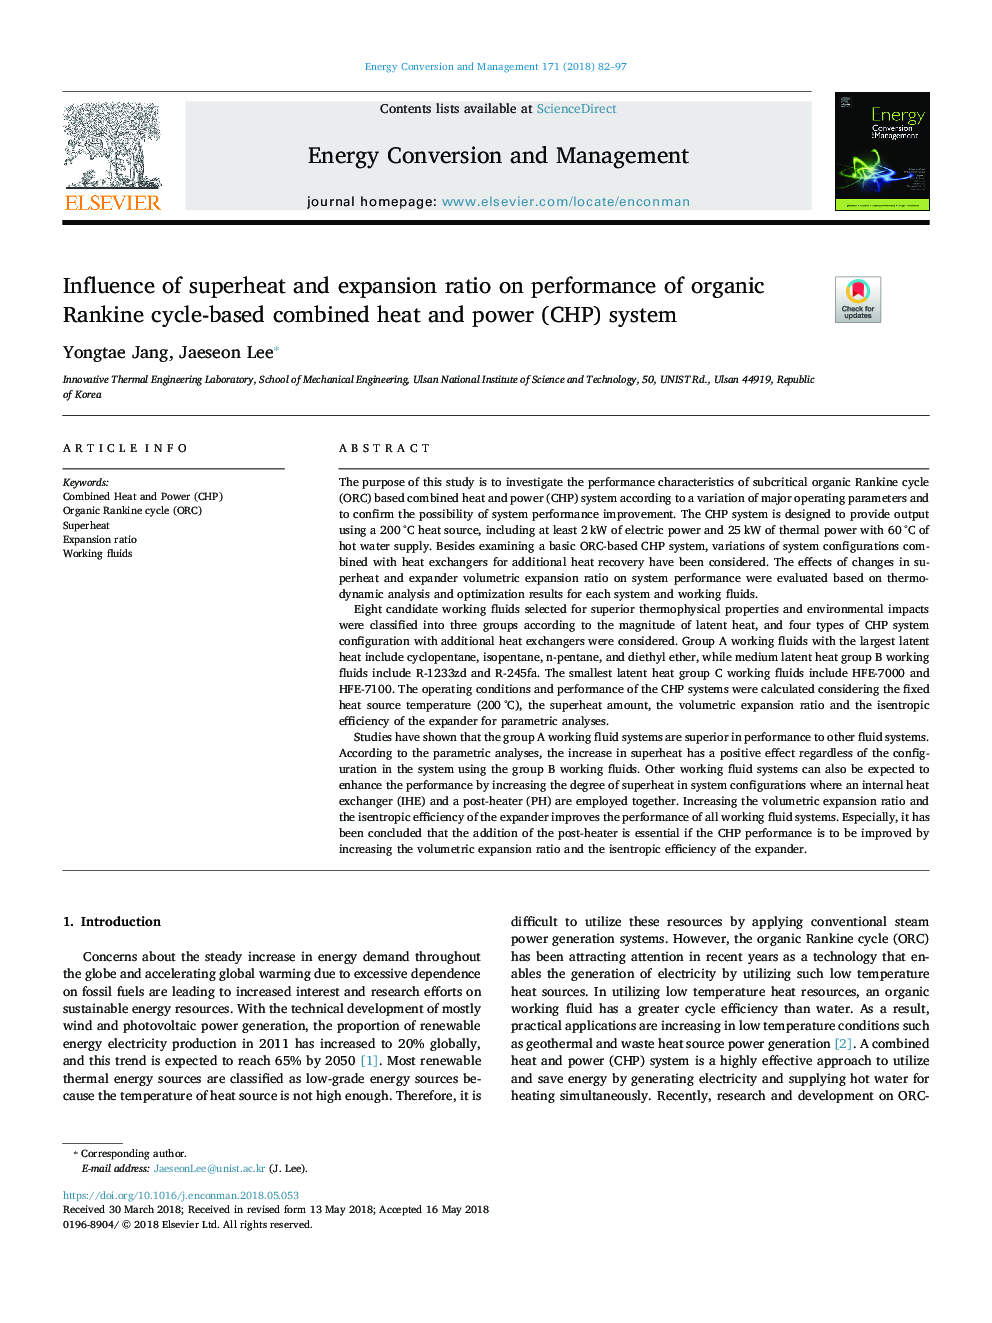 Influence of superheat and expansion ratio on performance of organic Rankine cycle-based combined heat and power (CHP) system